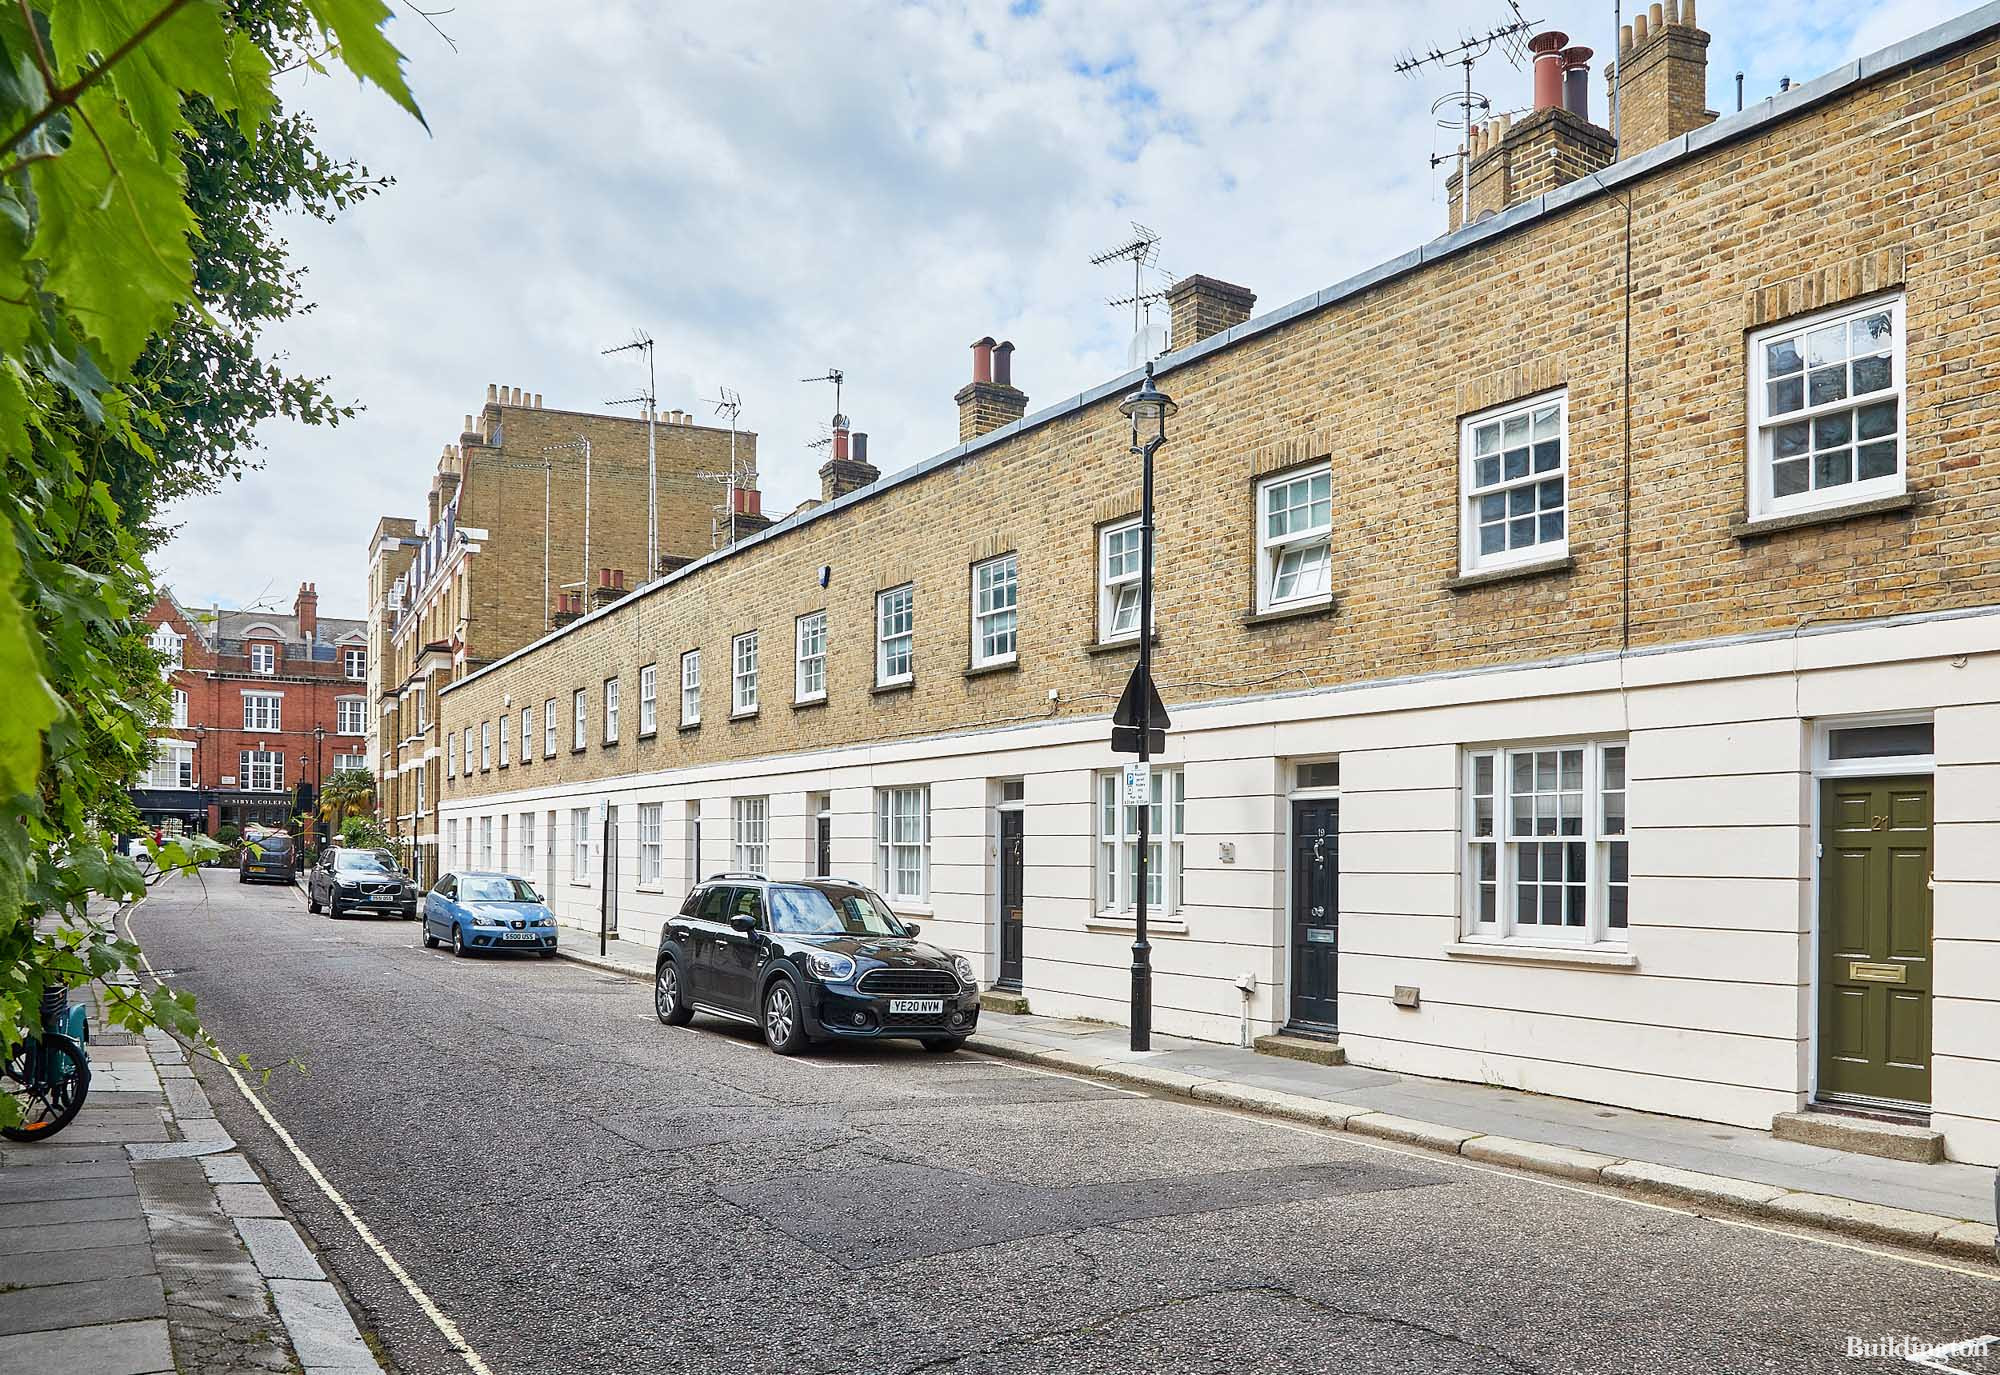 21 Passmore Street development in Belgravia, London SW1. The road leads to Pimlico Road from Graham Terrace.